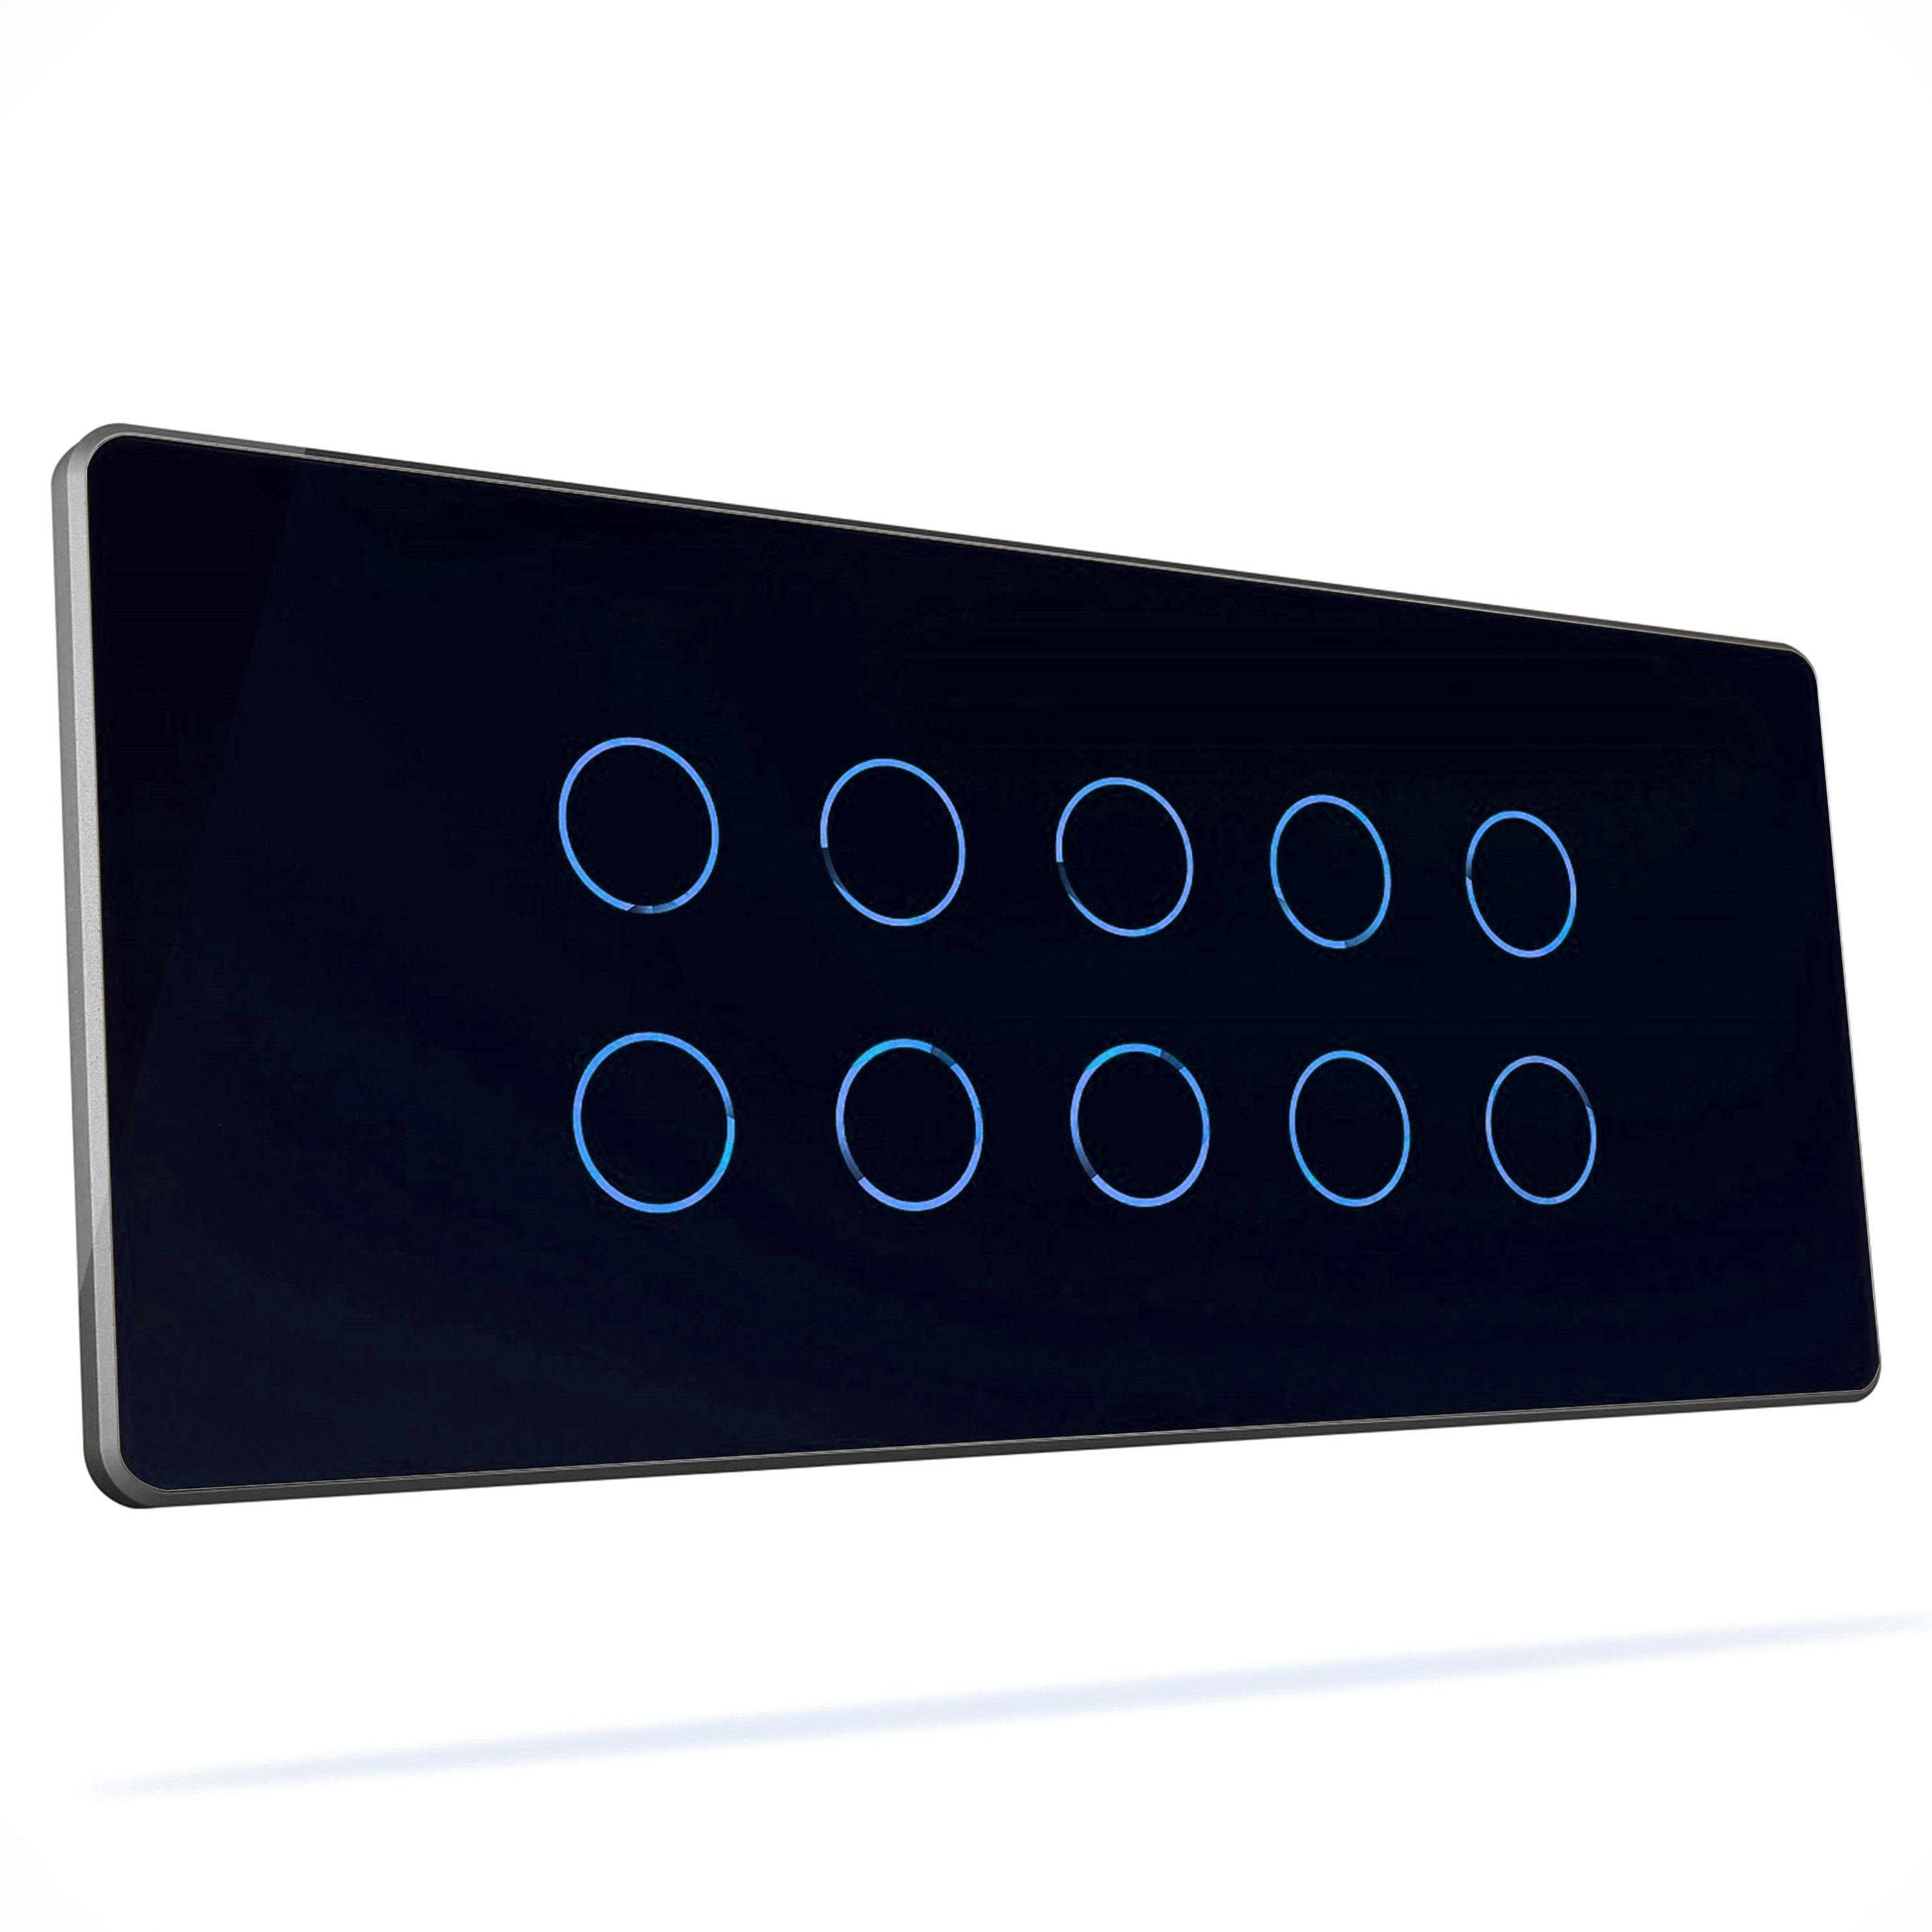 HOGAR SMART TEN TOUCH SWITCH PANLES WITH BUILT-IN AUTOMATION - Ankur Lighting